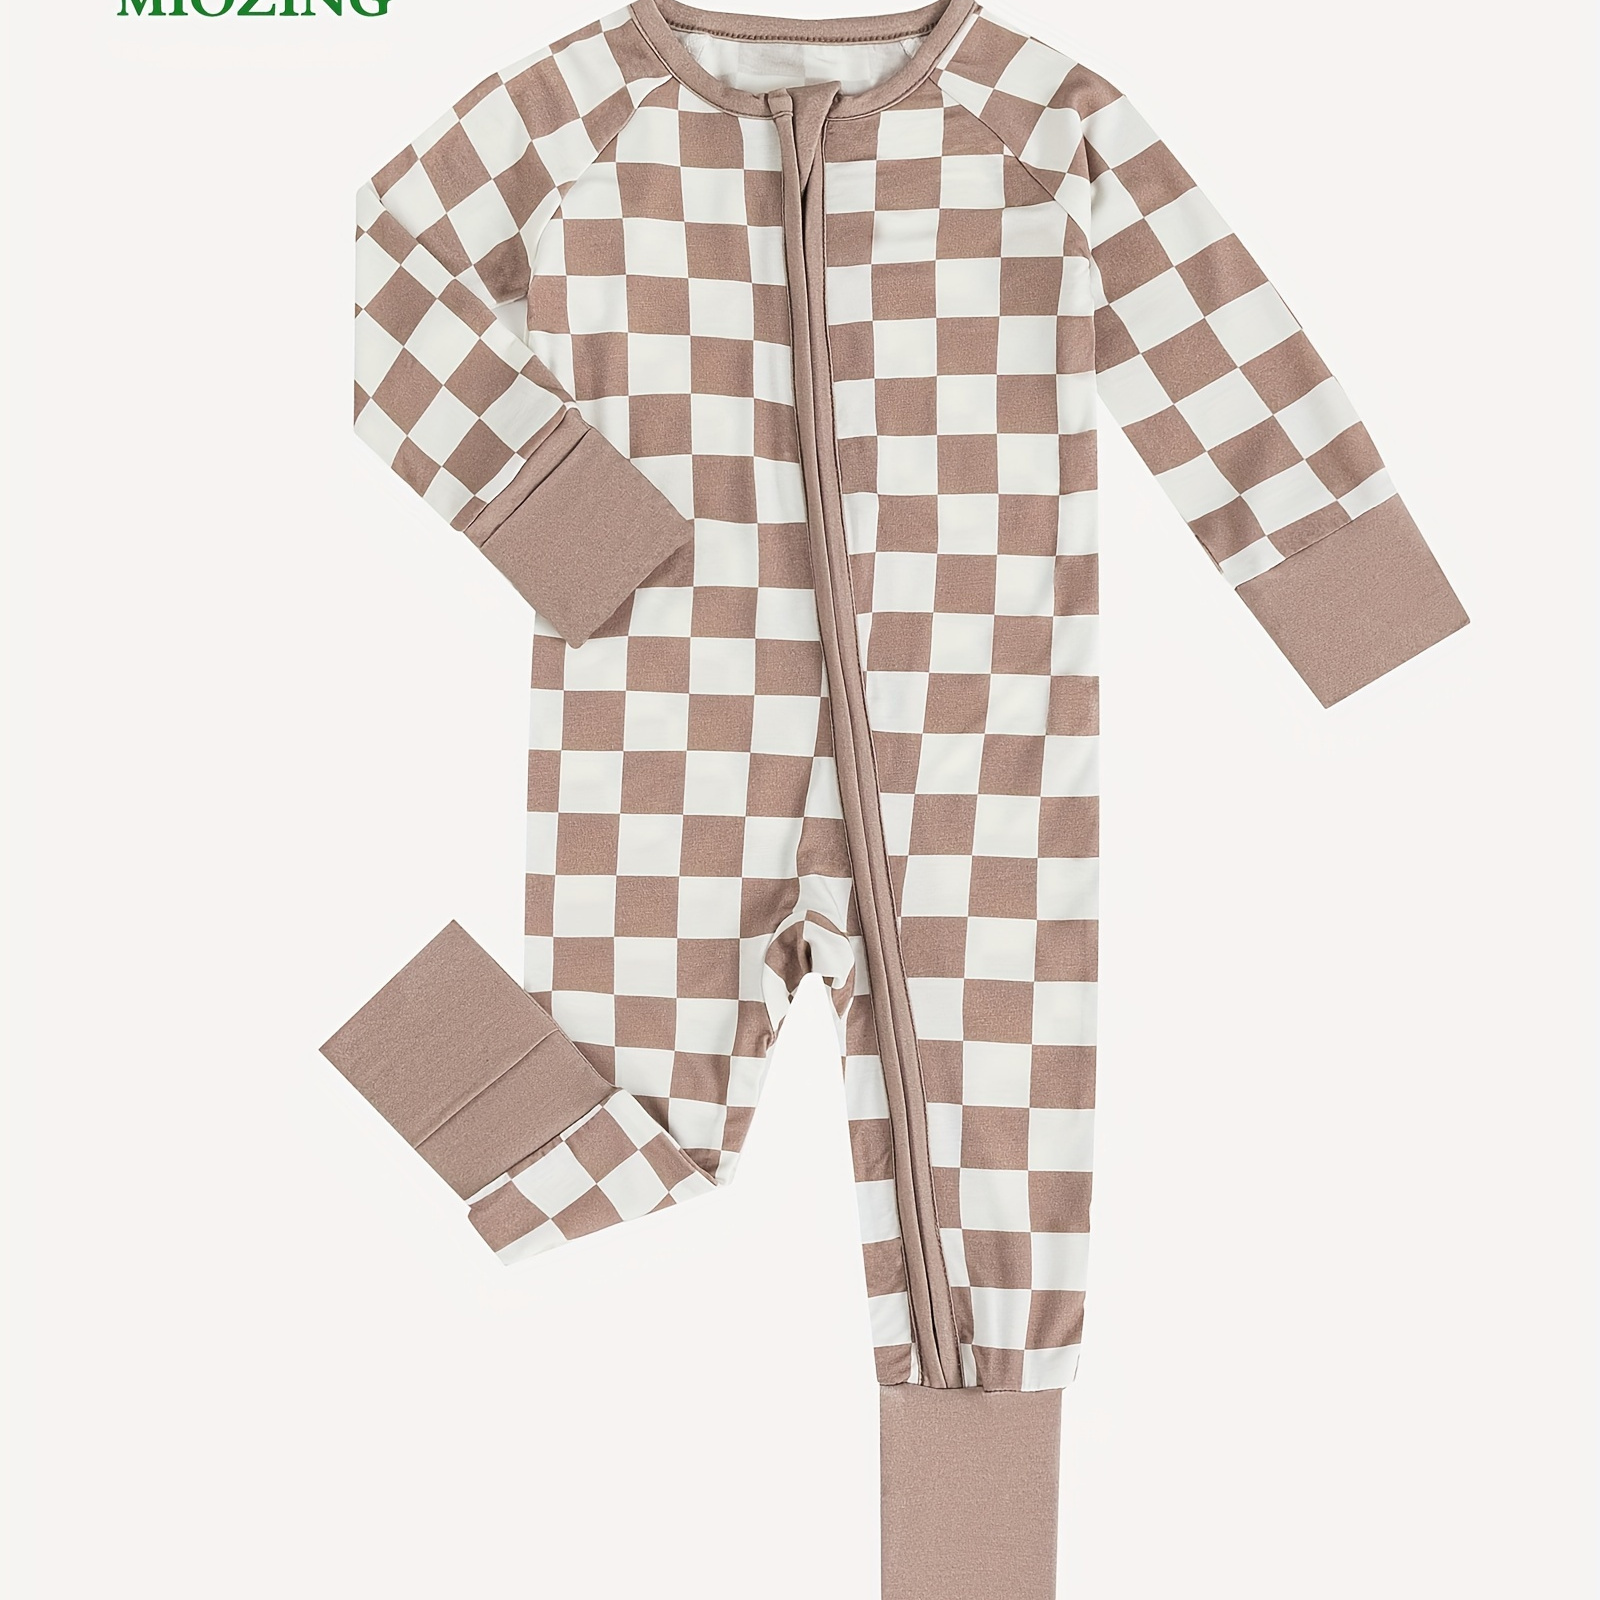 

Miozing Bamboo Fiber Fabric Baby Boys Classic Checkboard Pattern Jumpsuit With Foldable Foot Cover, Infant Long Sleeve Zip Up Romper